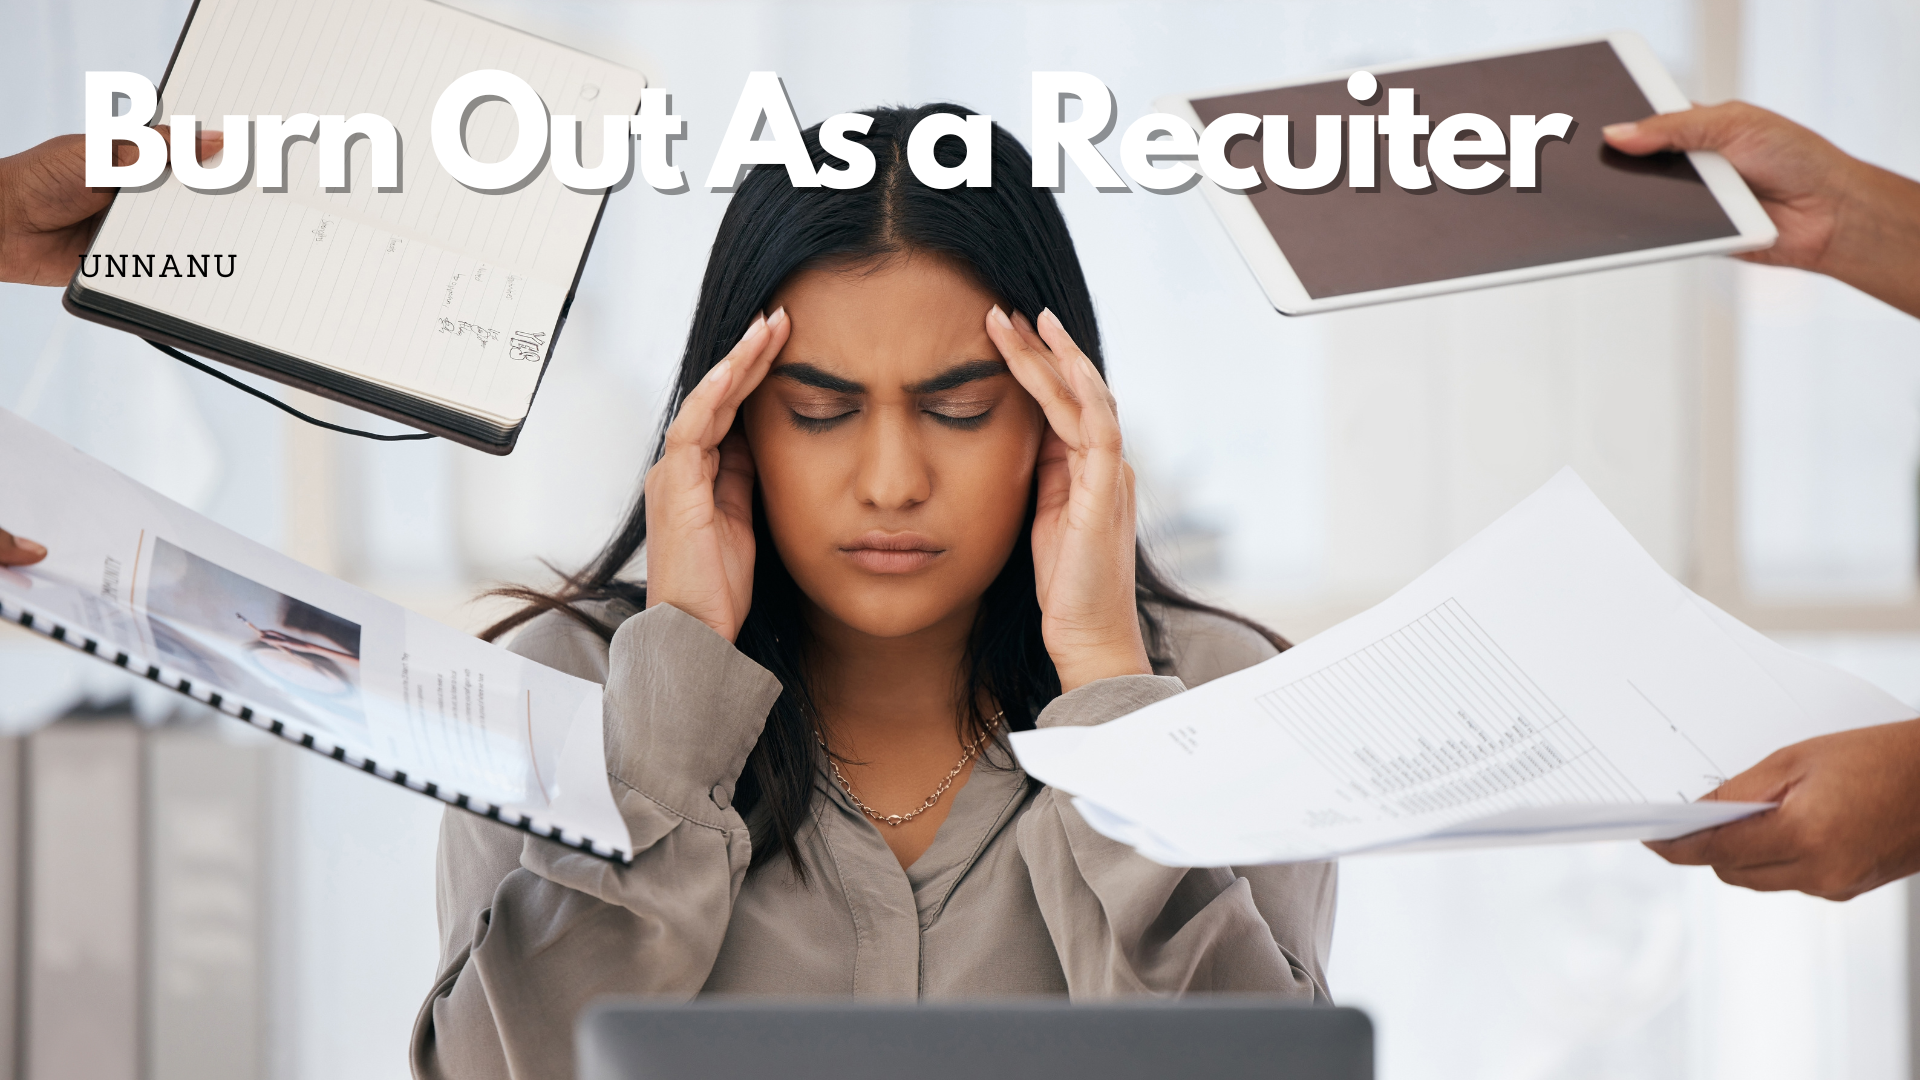 How Hiring and Recruiting Mangers Can Use A.I. to Avoid Burnout